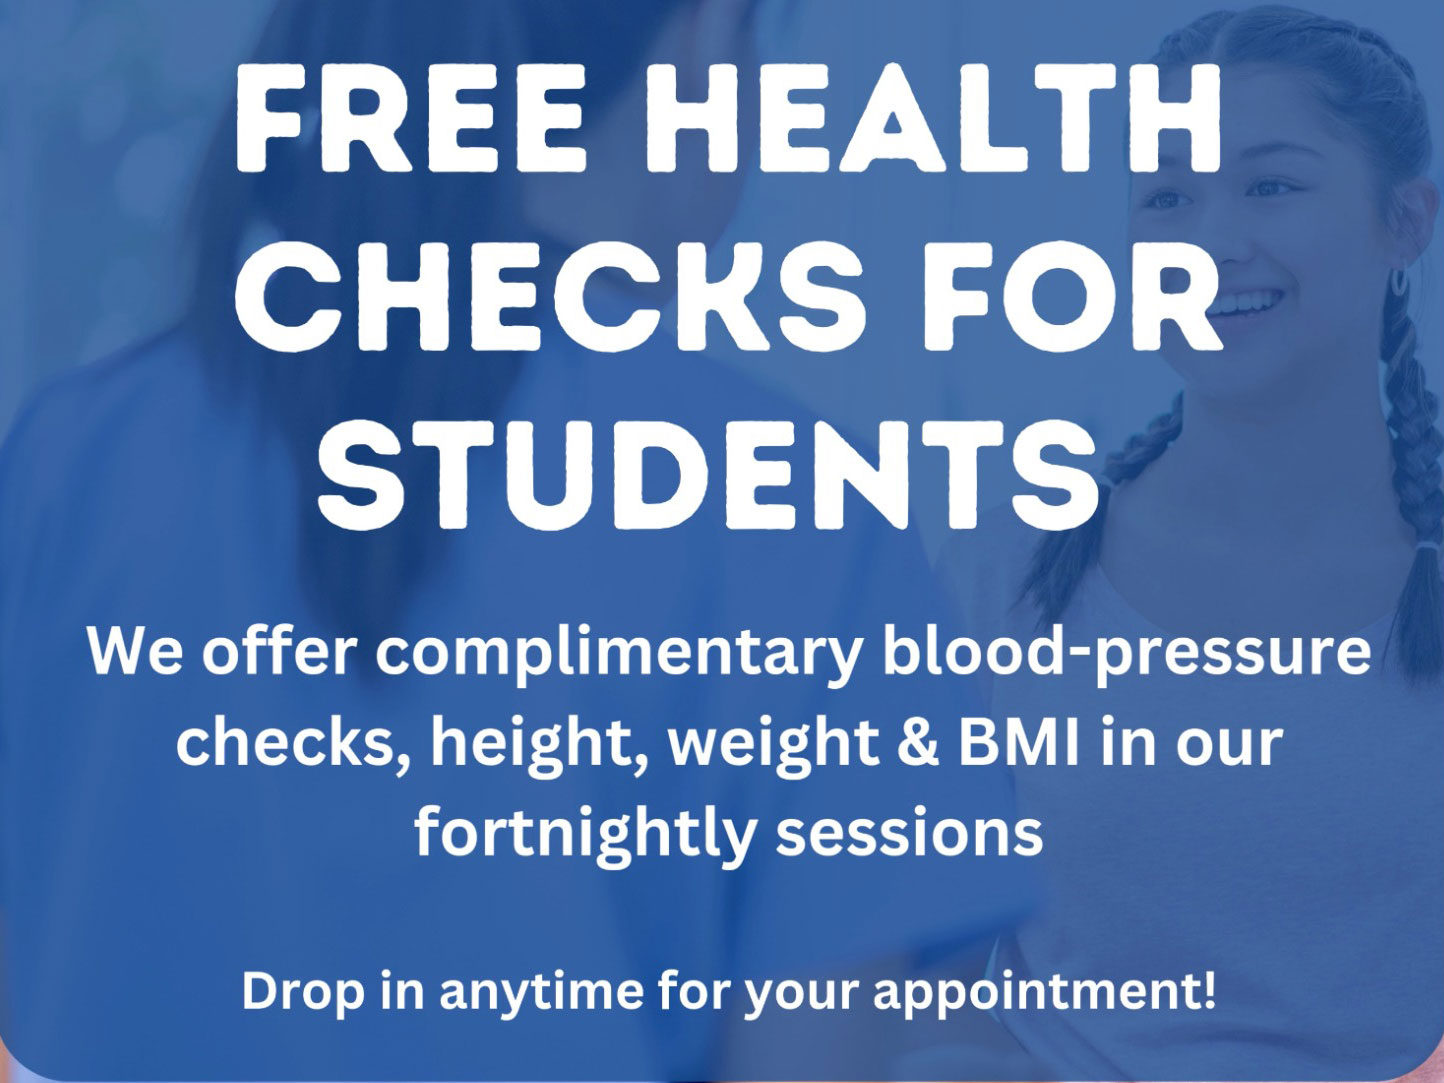 Link to New Service - free health checks and advice from Elm Tree Medical centre.